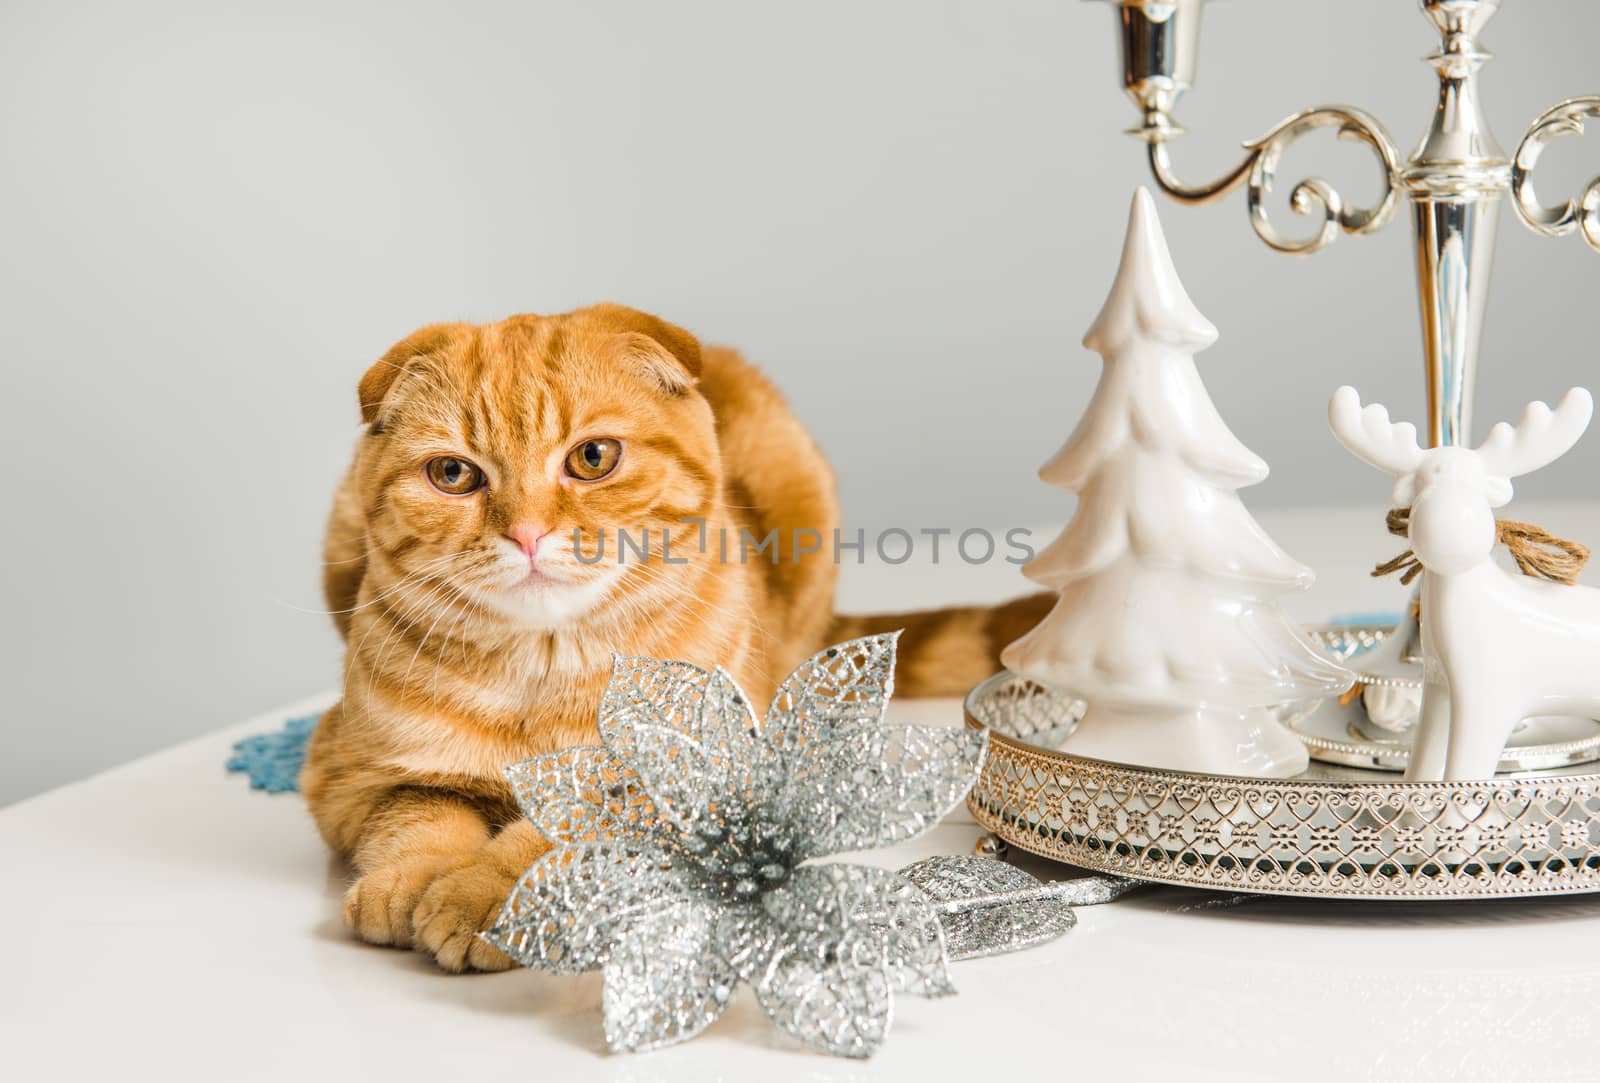 Scottish Fold red cat with candlestick on a white background on holiday. Cat and etiquette.